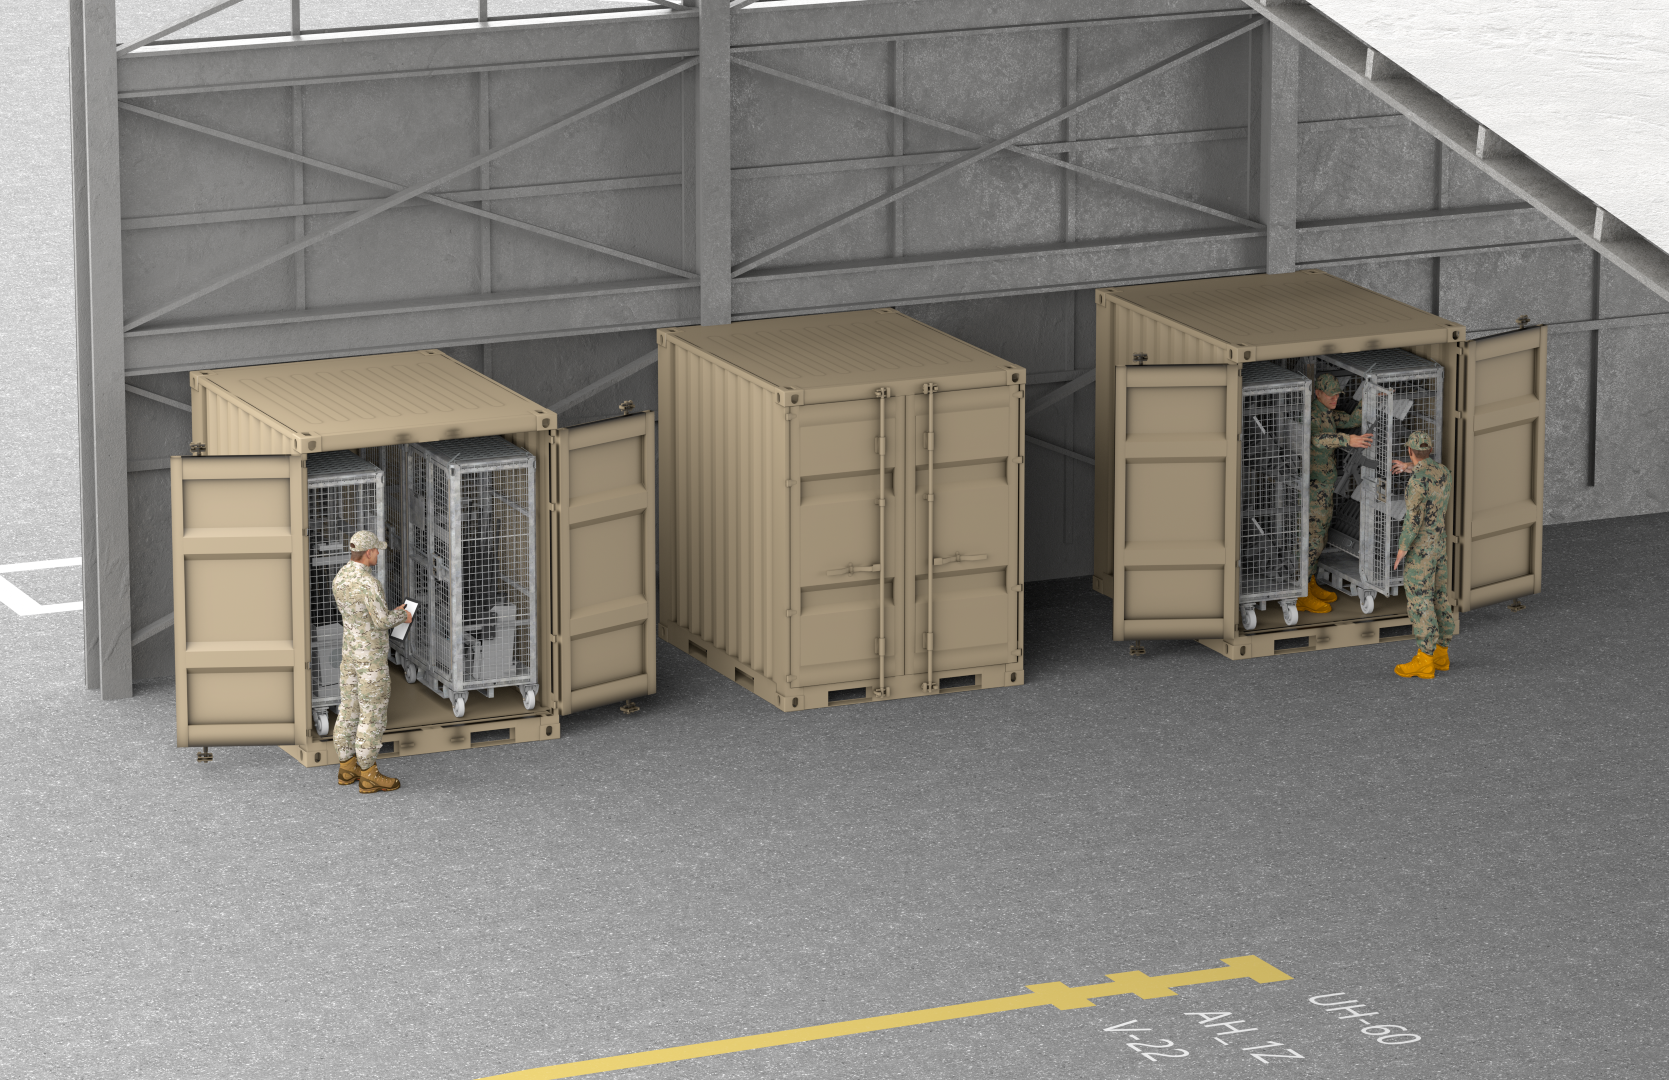 Three containers in a hangar. Two are open with cages visible. Weapons are locked inside.